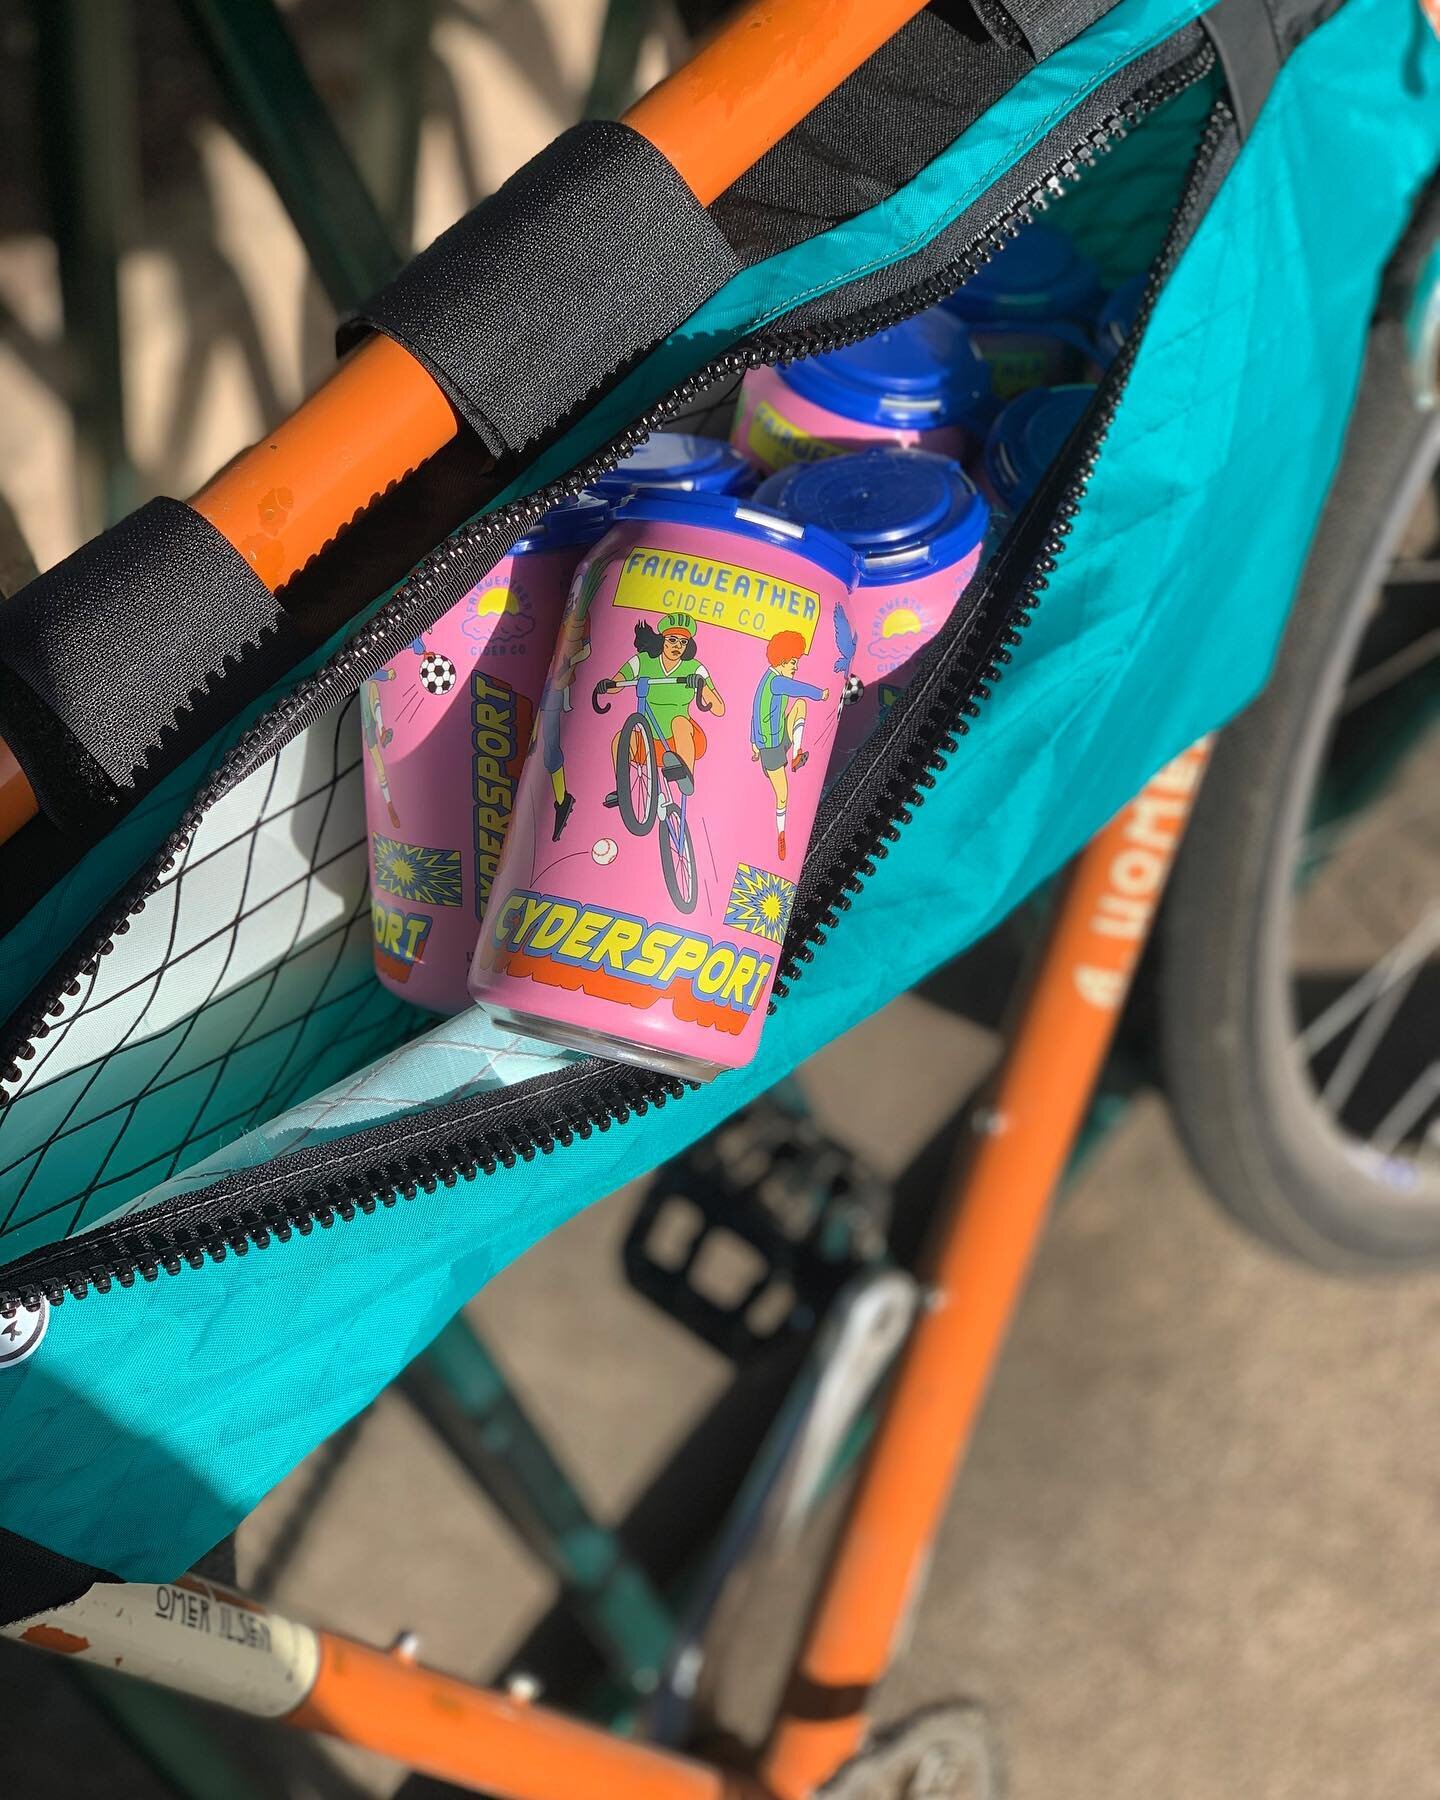 99 Calories, 4.5% ABV with a mega dose of grapefruit.  Topped off with electrolytes, CYDERSPORT is quite possibly the most refreshing thing in a can.  The high is 69 today, get some sunshine and grab some Sports ✌️